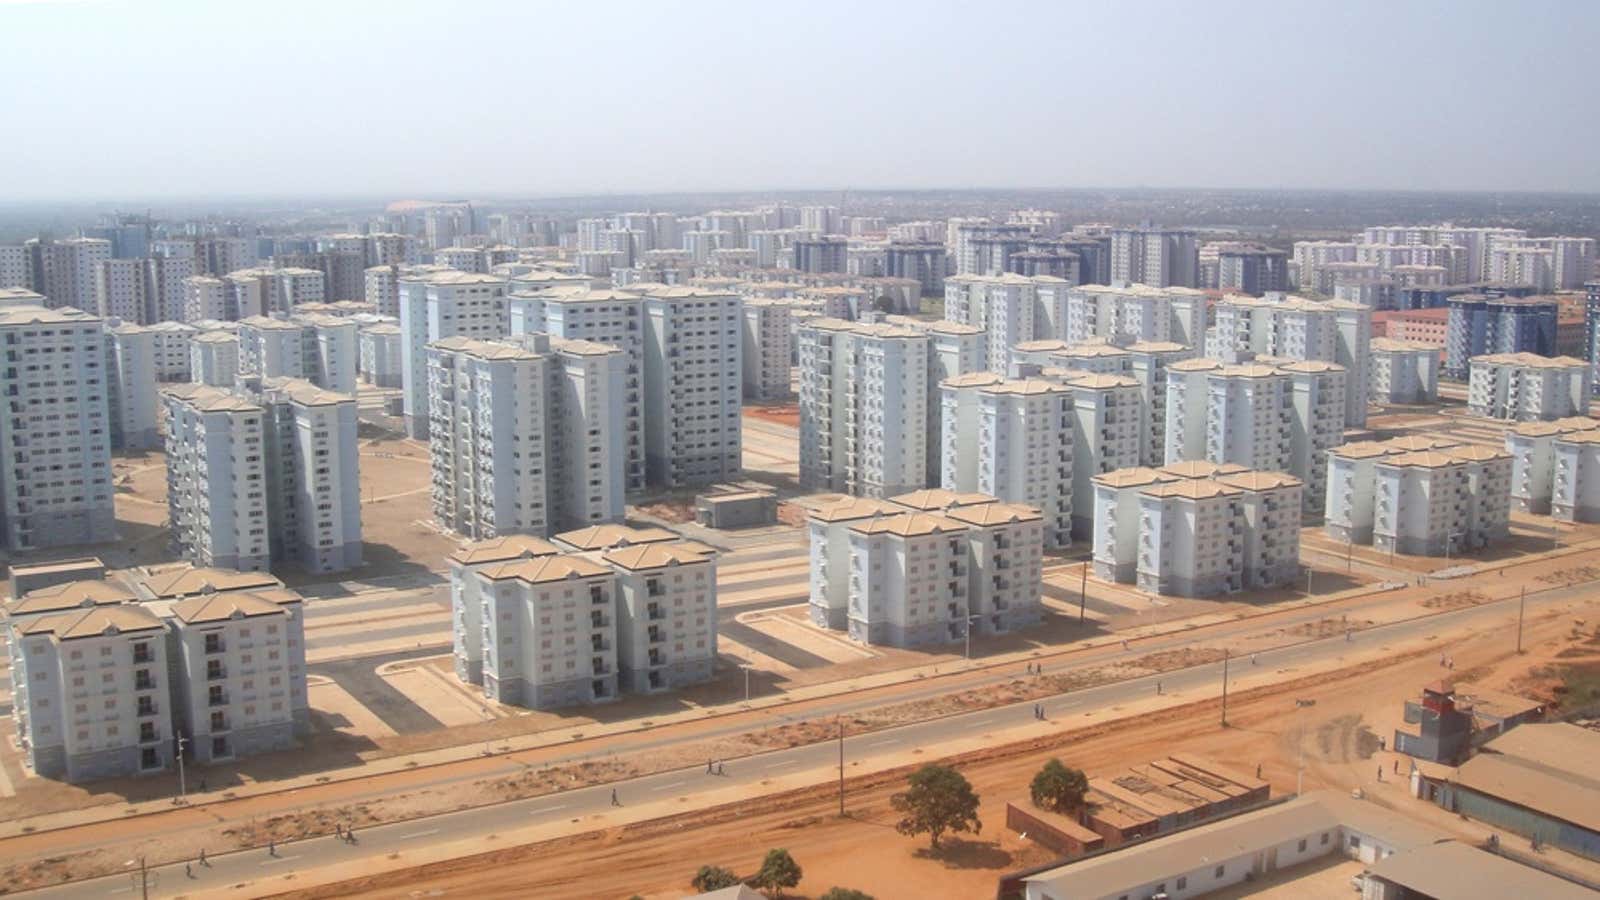 Kilamba New City in Luanda, Angola was developed by Chinese company CITIC and designed to accommodate 500,000 people.